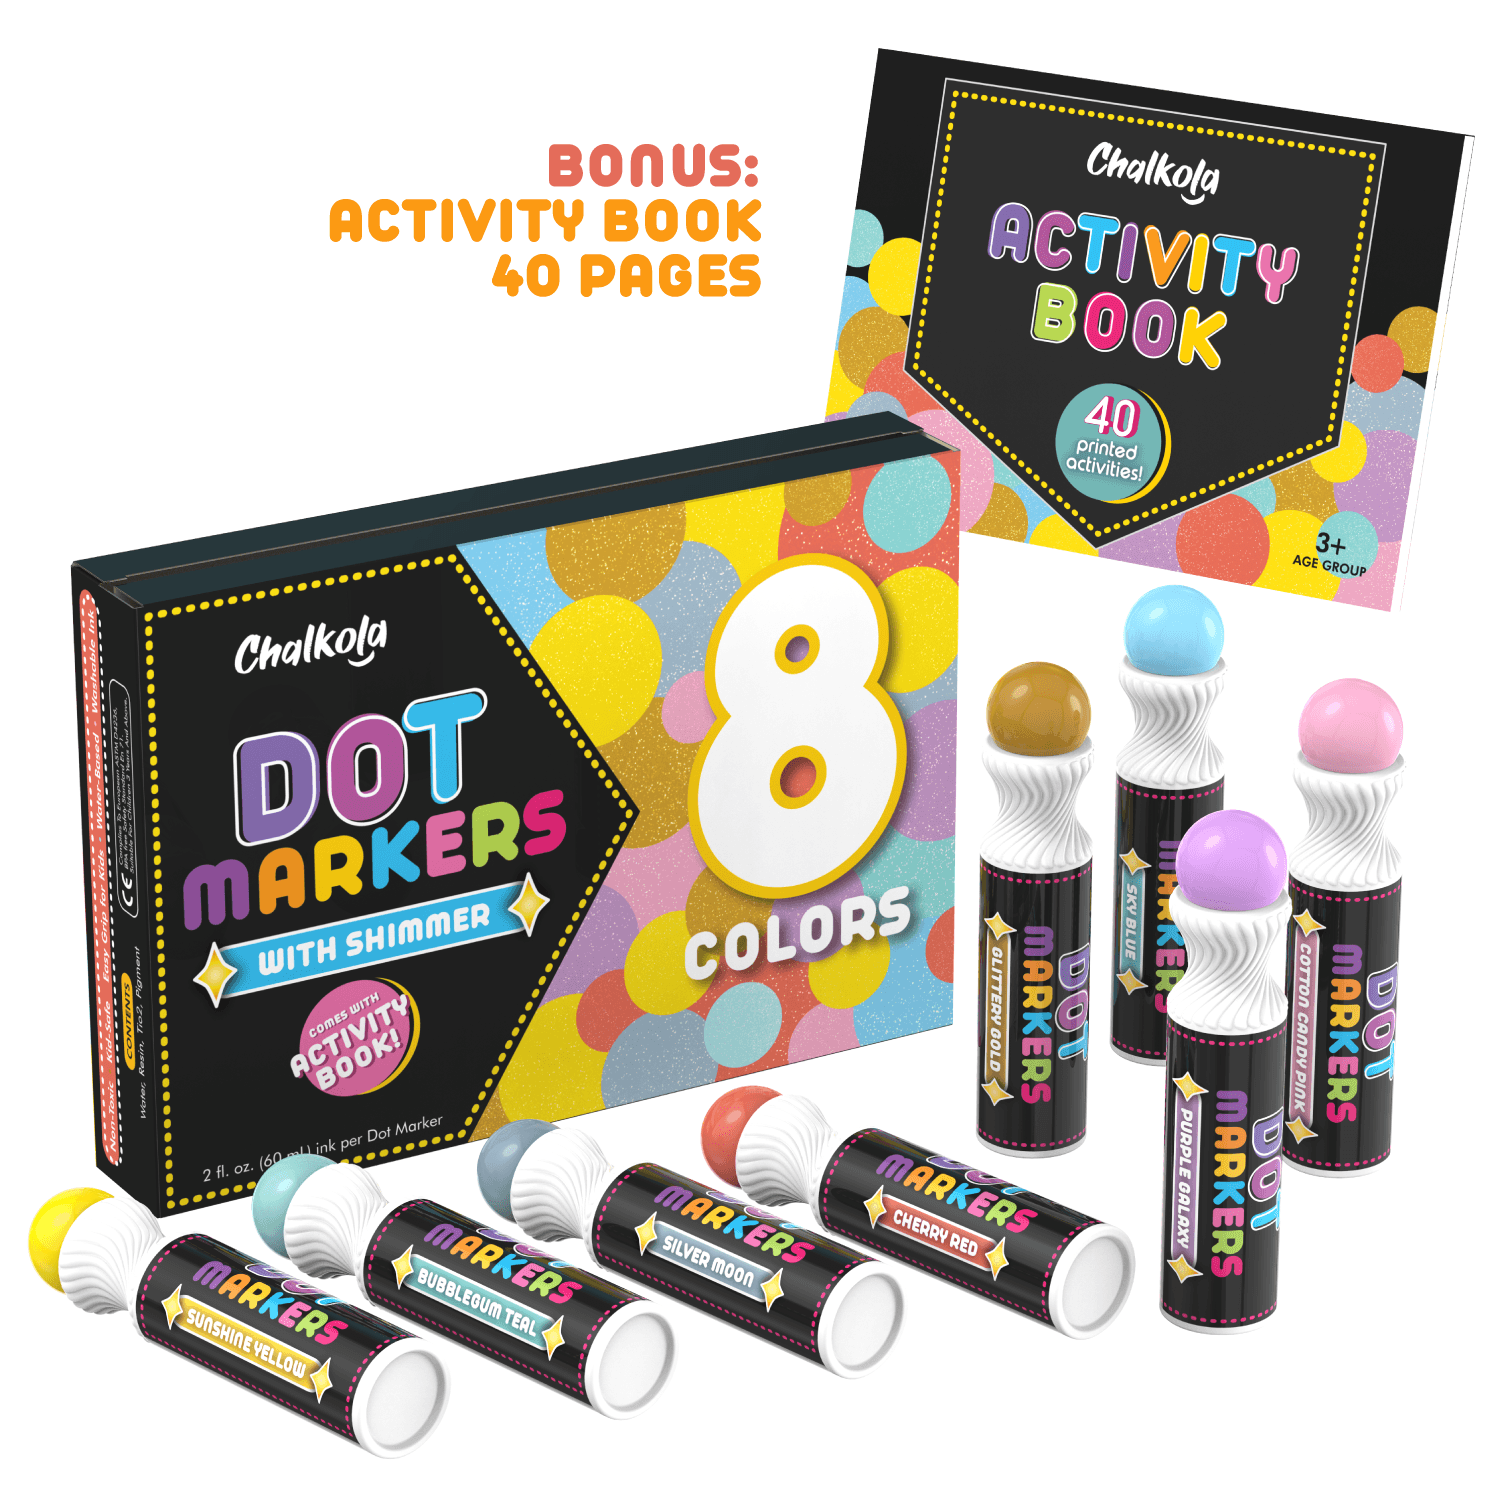 Shimmer Washable Dot Markers by Creatology™